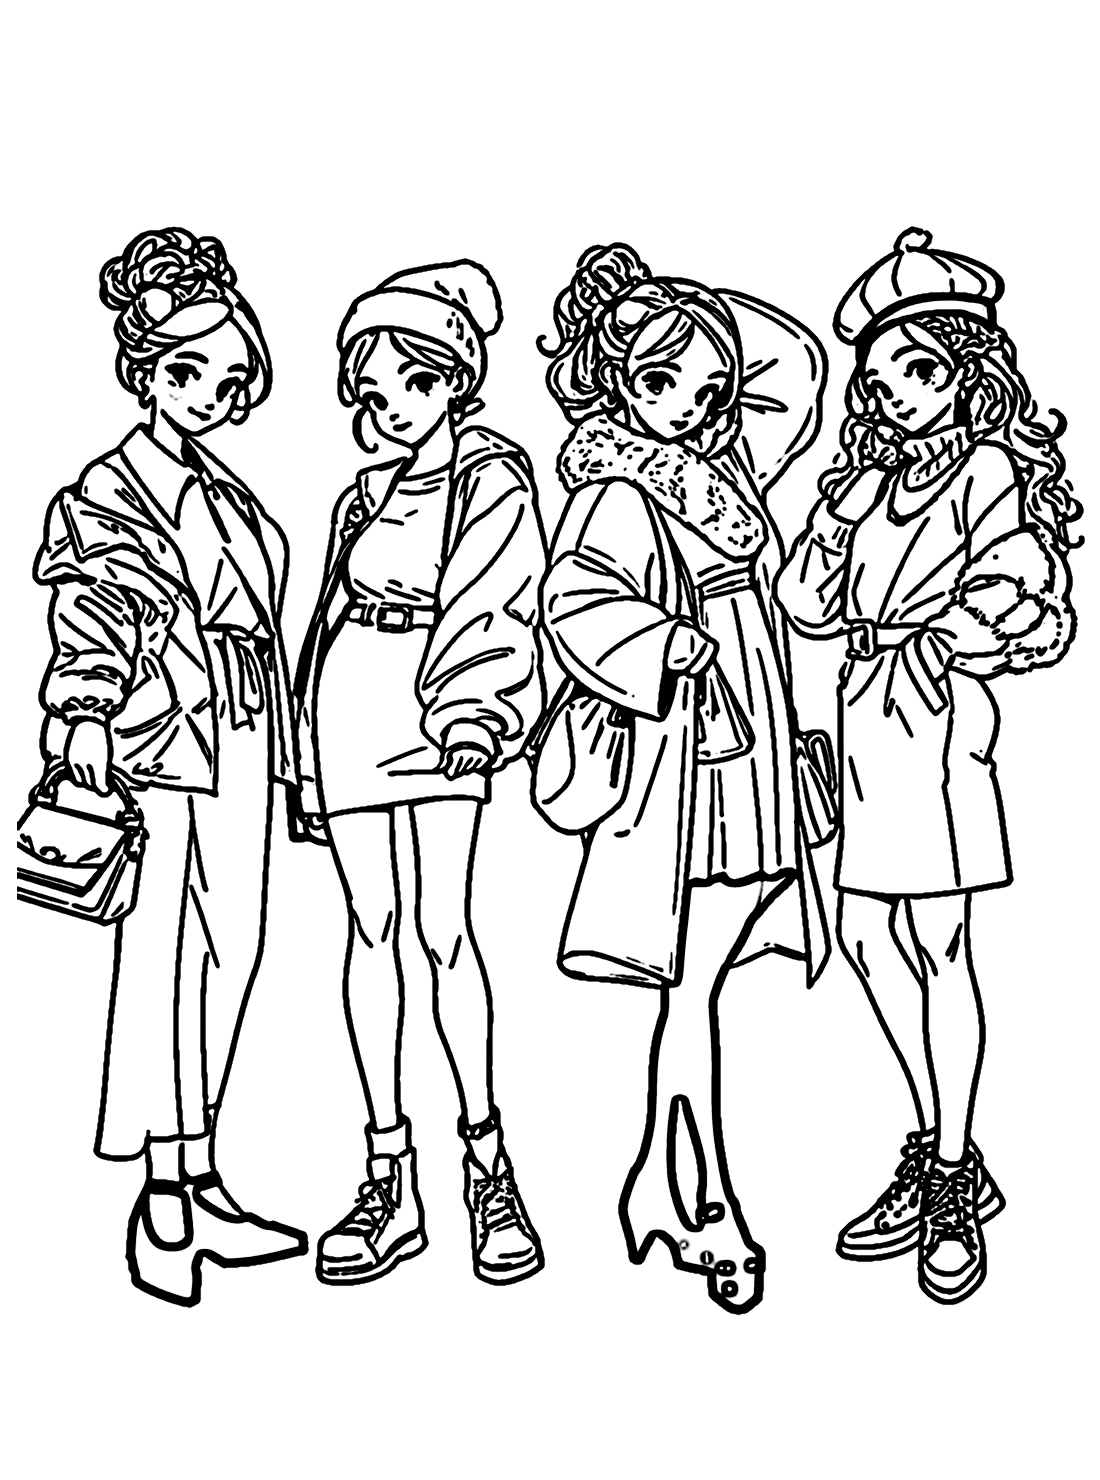 Blackpink cartoon coloring pages